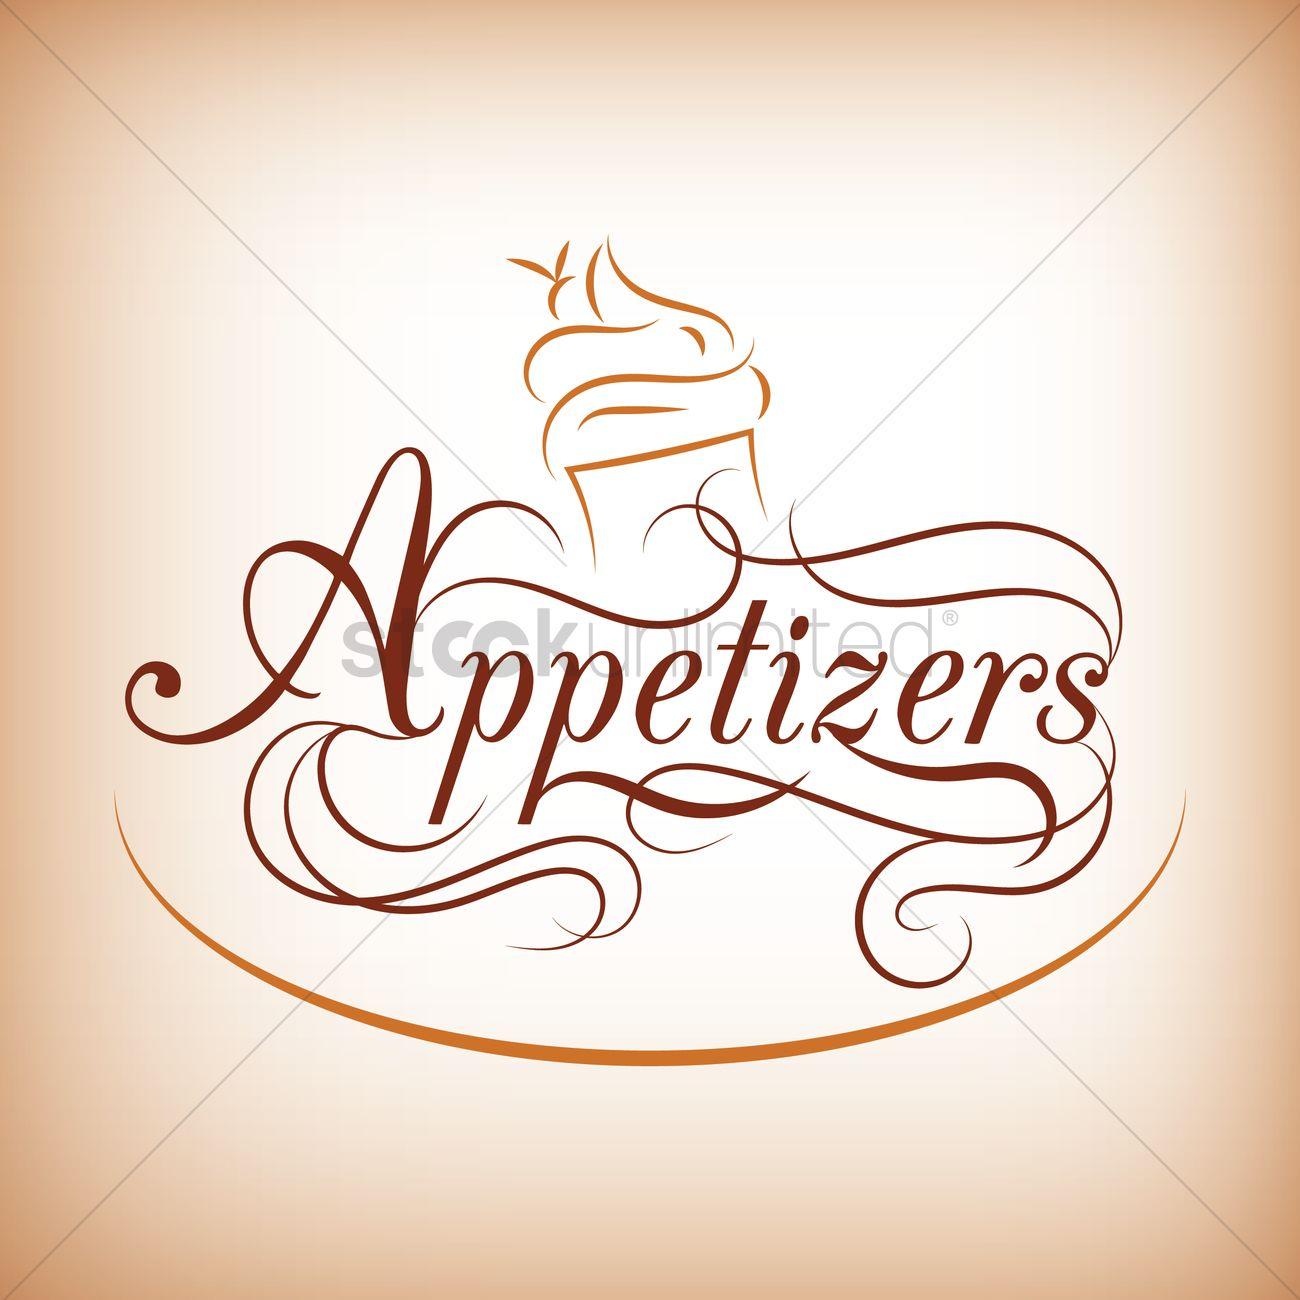 Appetizers Logo - Appetizers menu title Vector Image - 1859914 | StockUnlimited